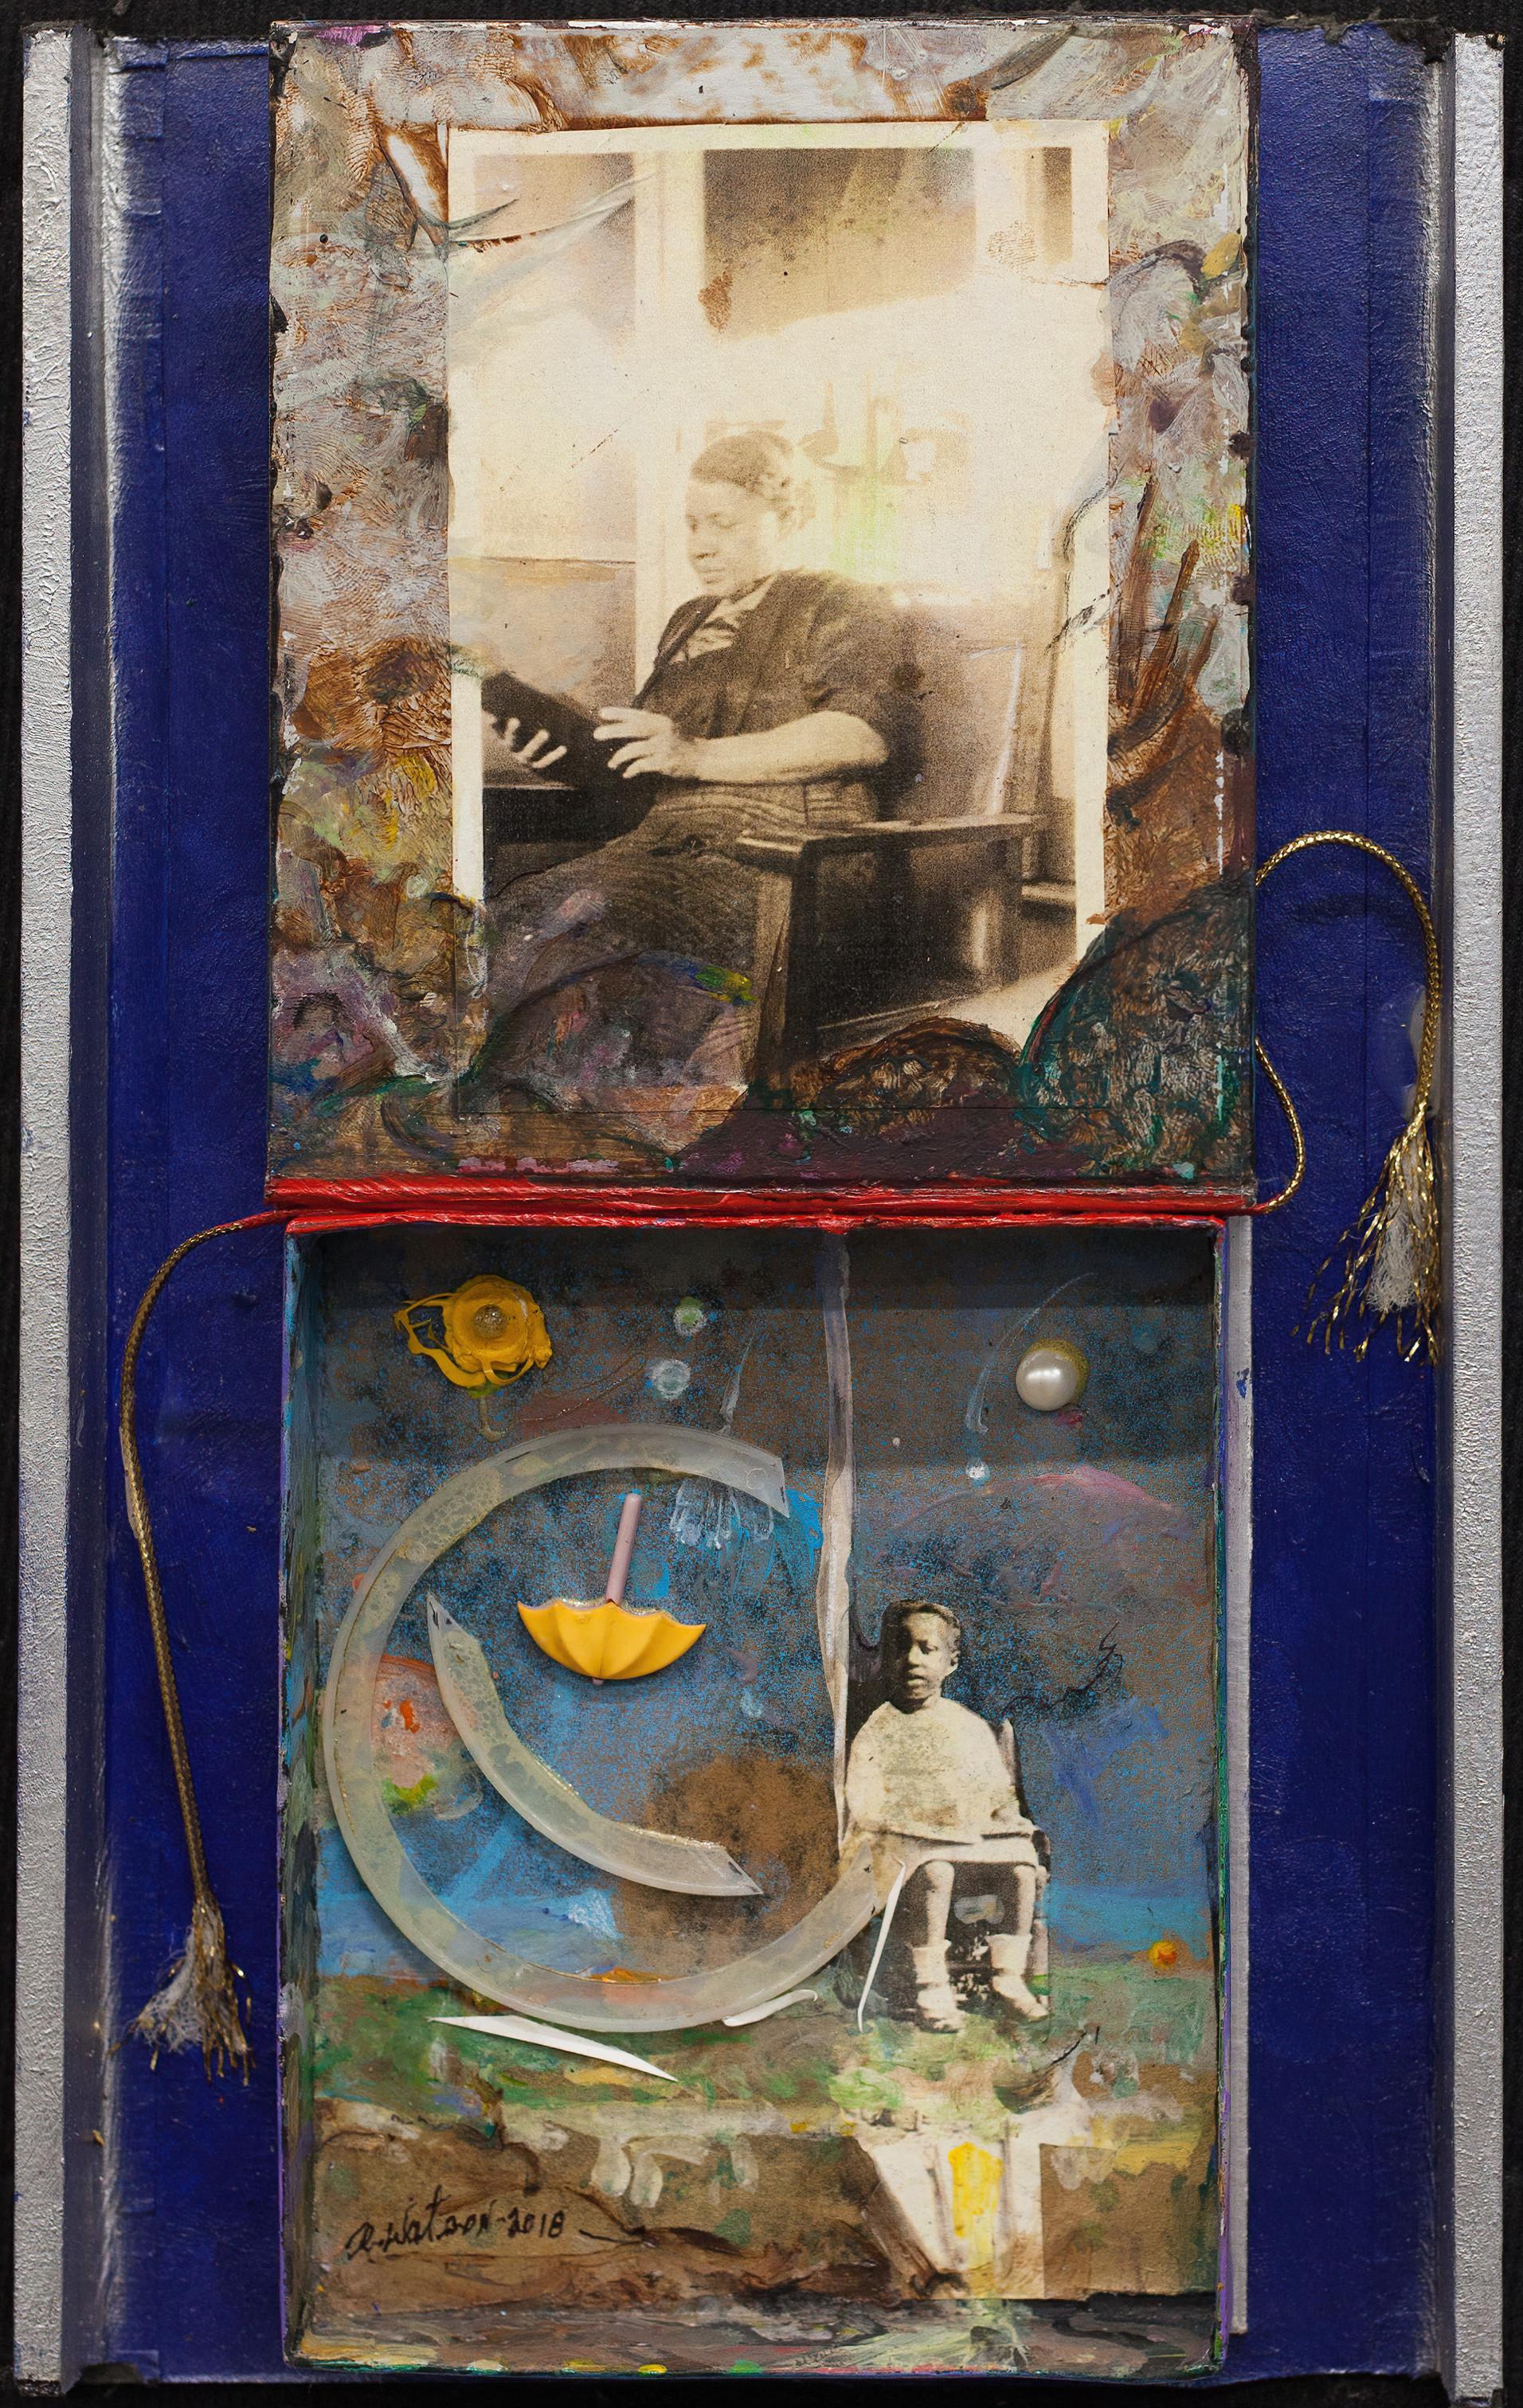 Richard J. Watson Figurative Sculpture - Catching Blessings: shadow box painting & collage w/ figures & found objects